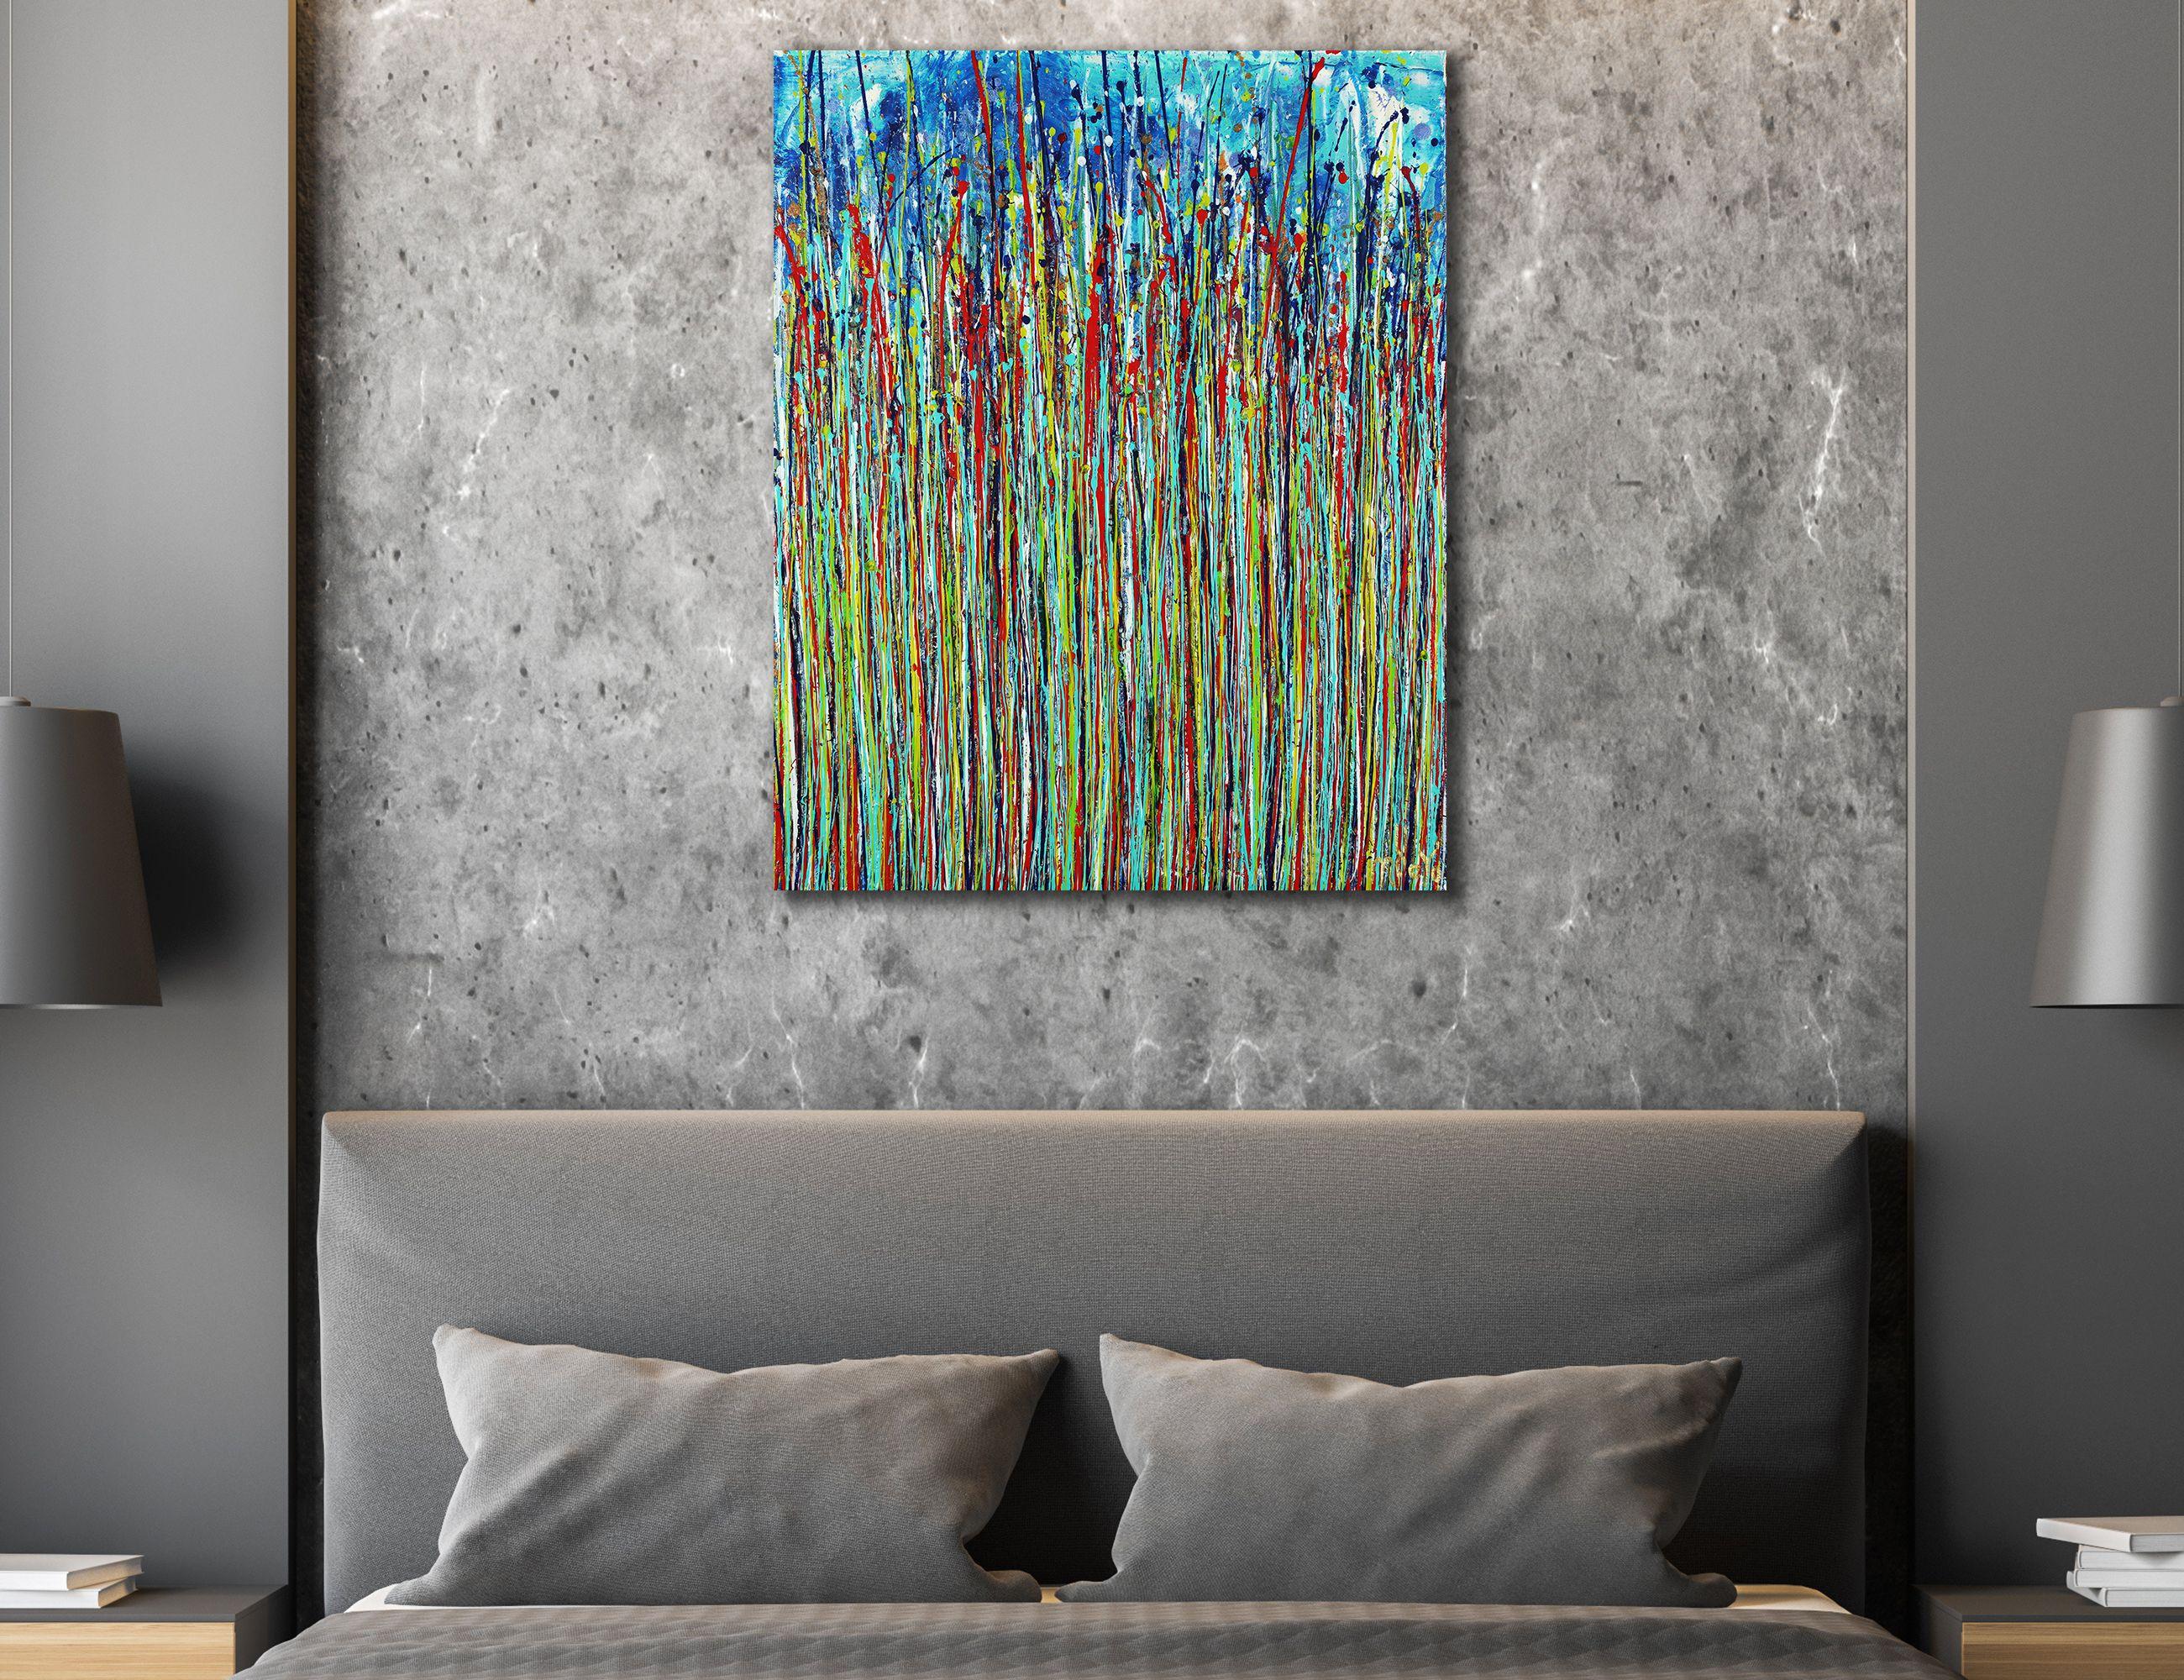 Expressive modern abstract, bold full of life, gloss and shimmer! inspired by nature. Shades of iridescent silver, green, red, gold, white over blue and silver background. signed in front.    I include a certificate of authenticity that lists the